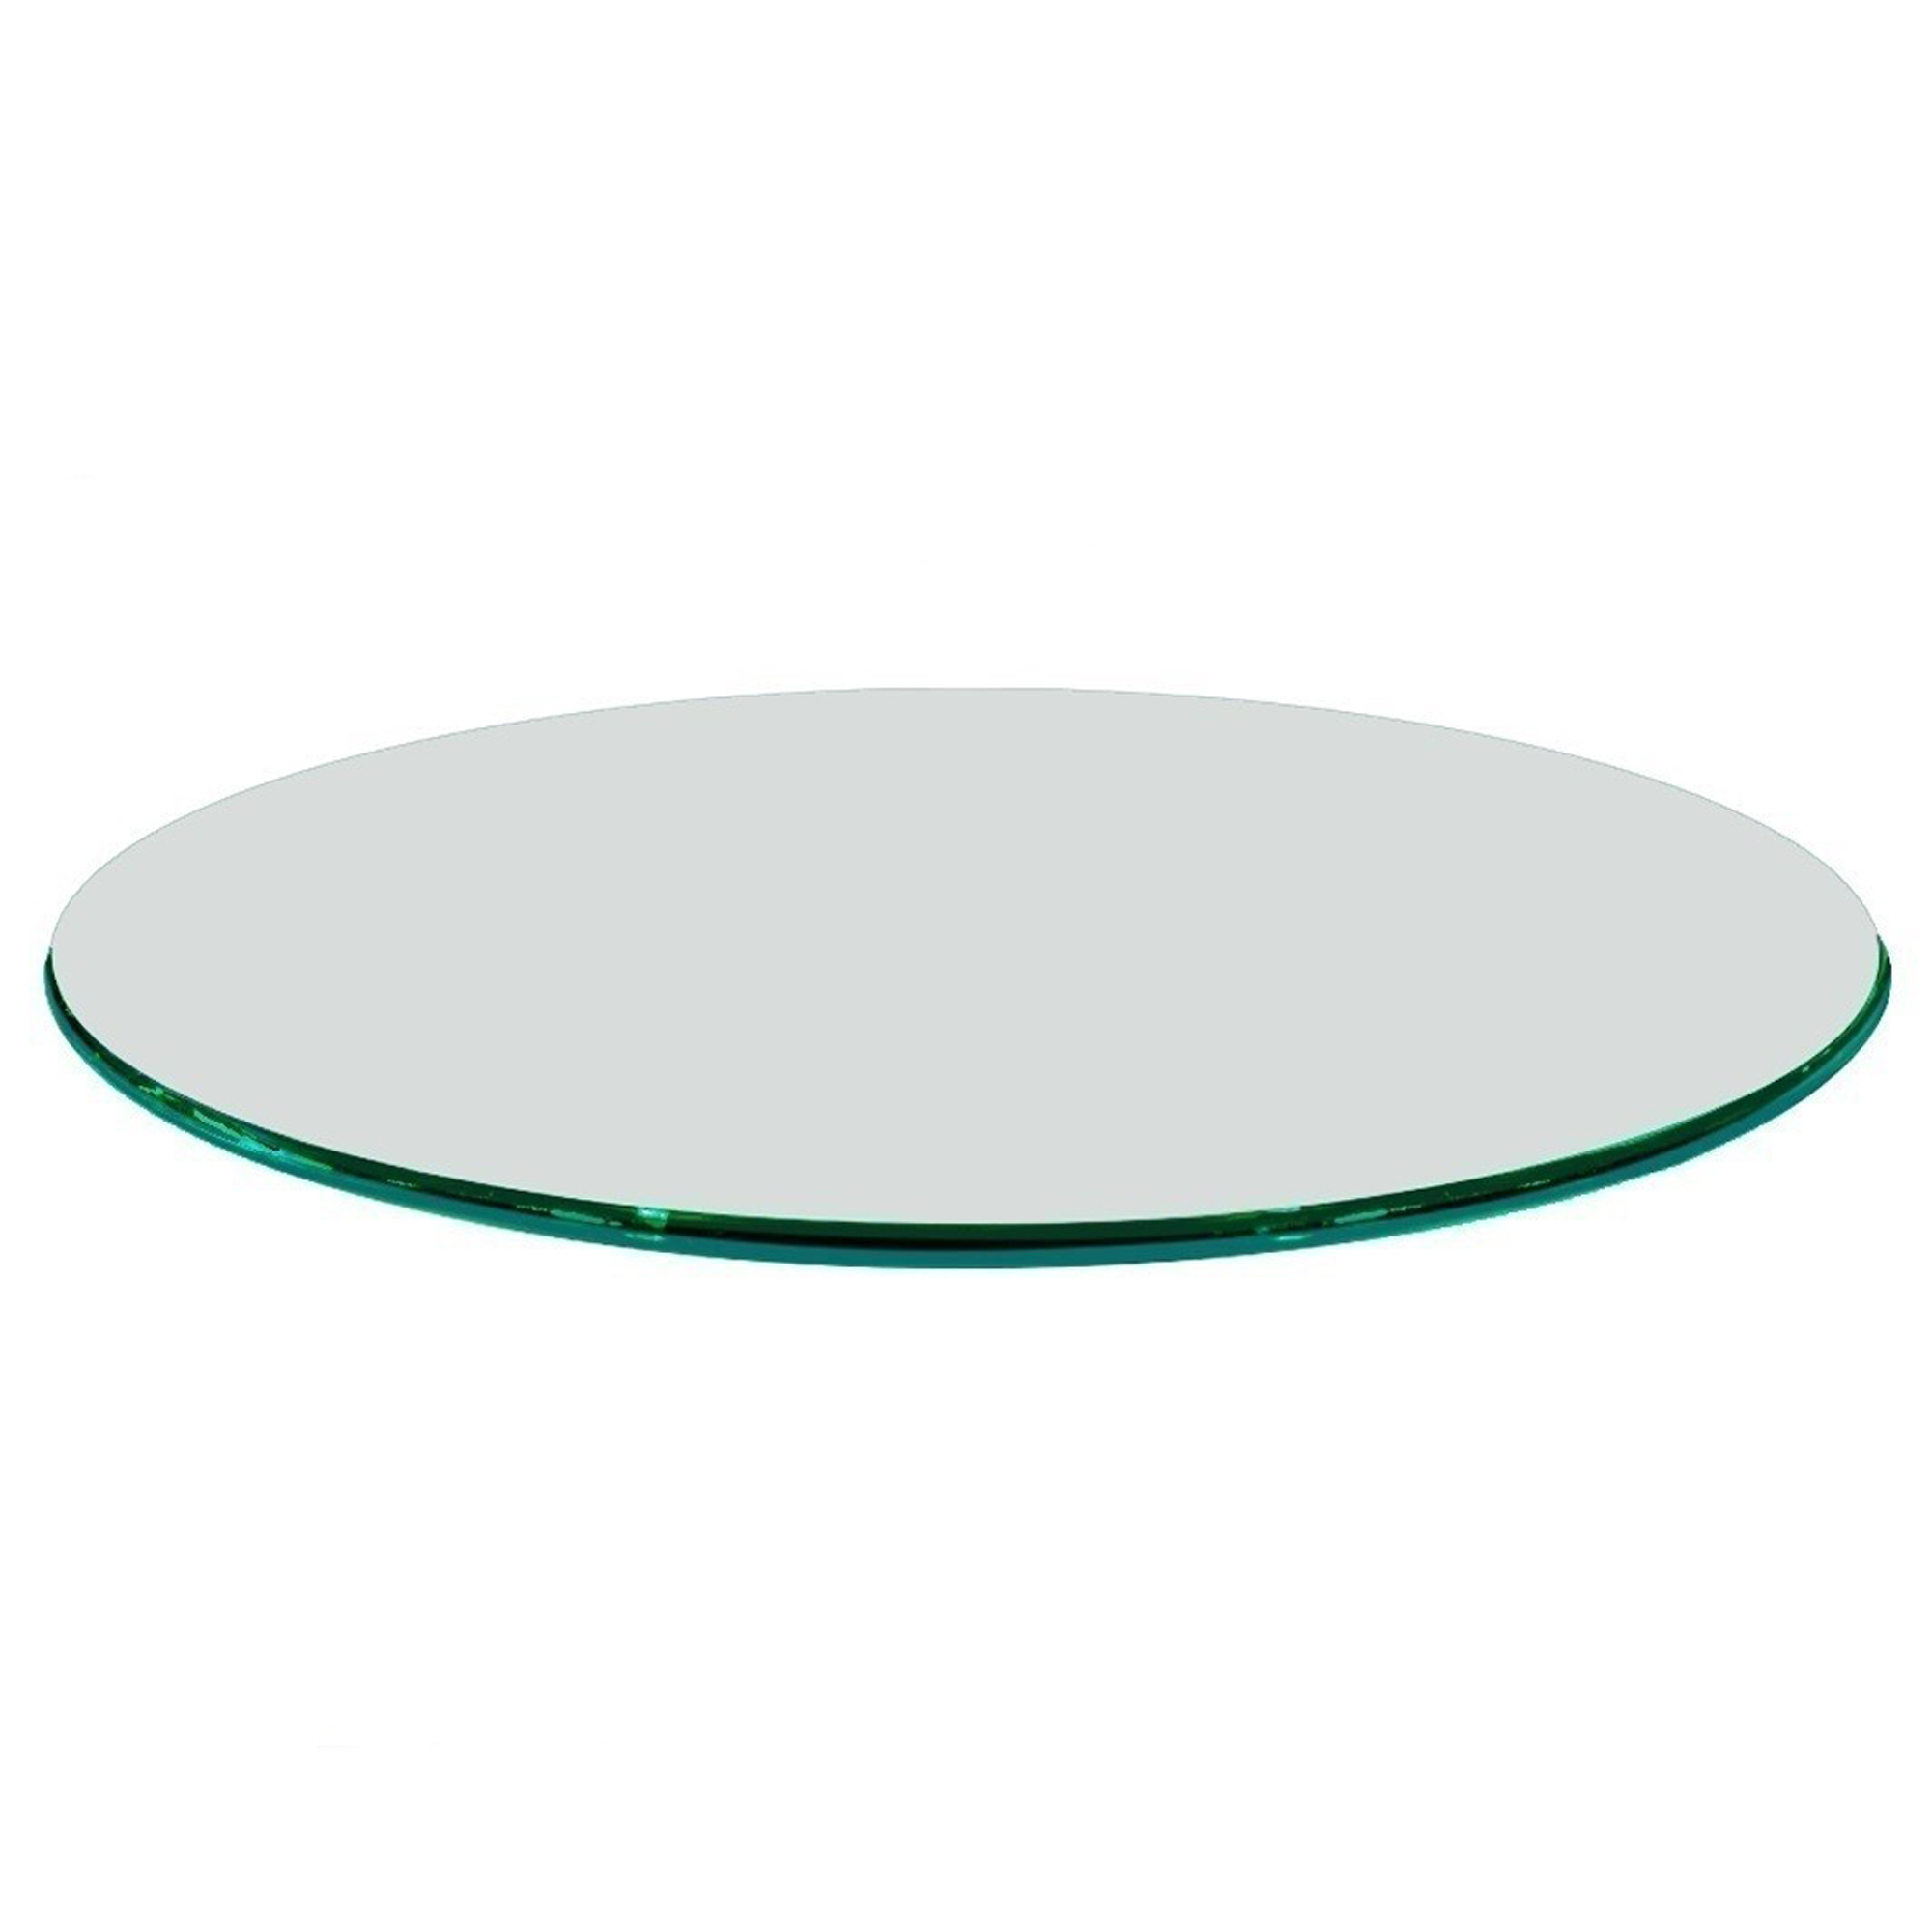 Round Glass Dining Table Tops, 45 Round Glass Table Top Replacement